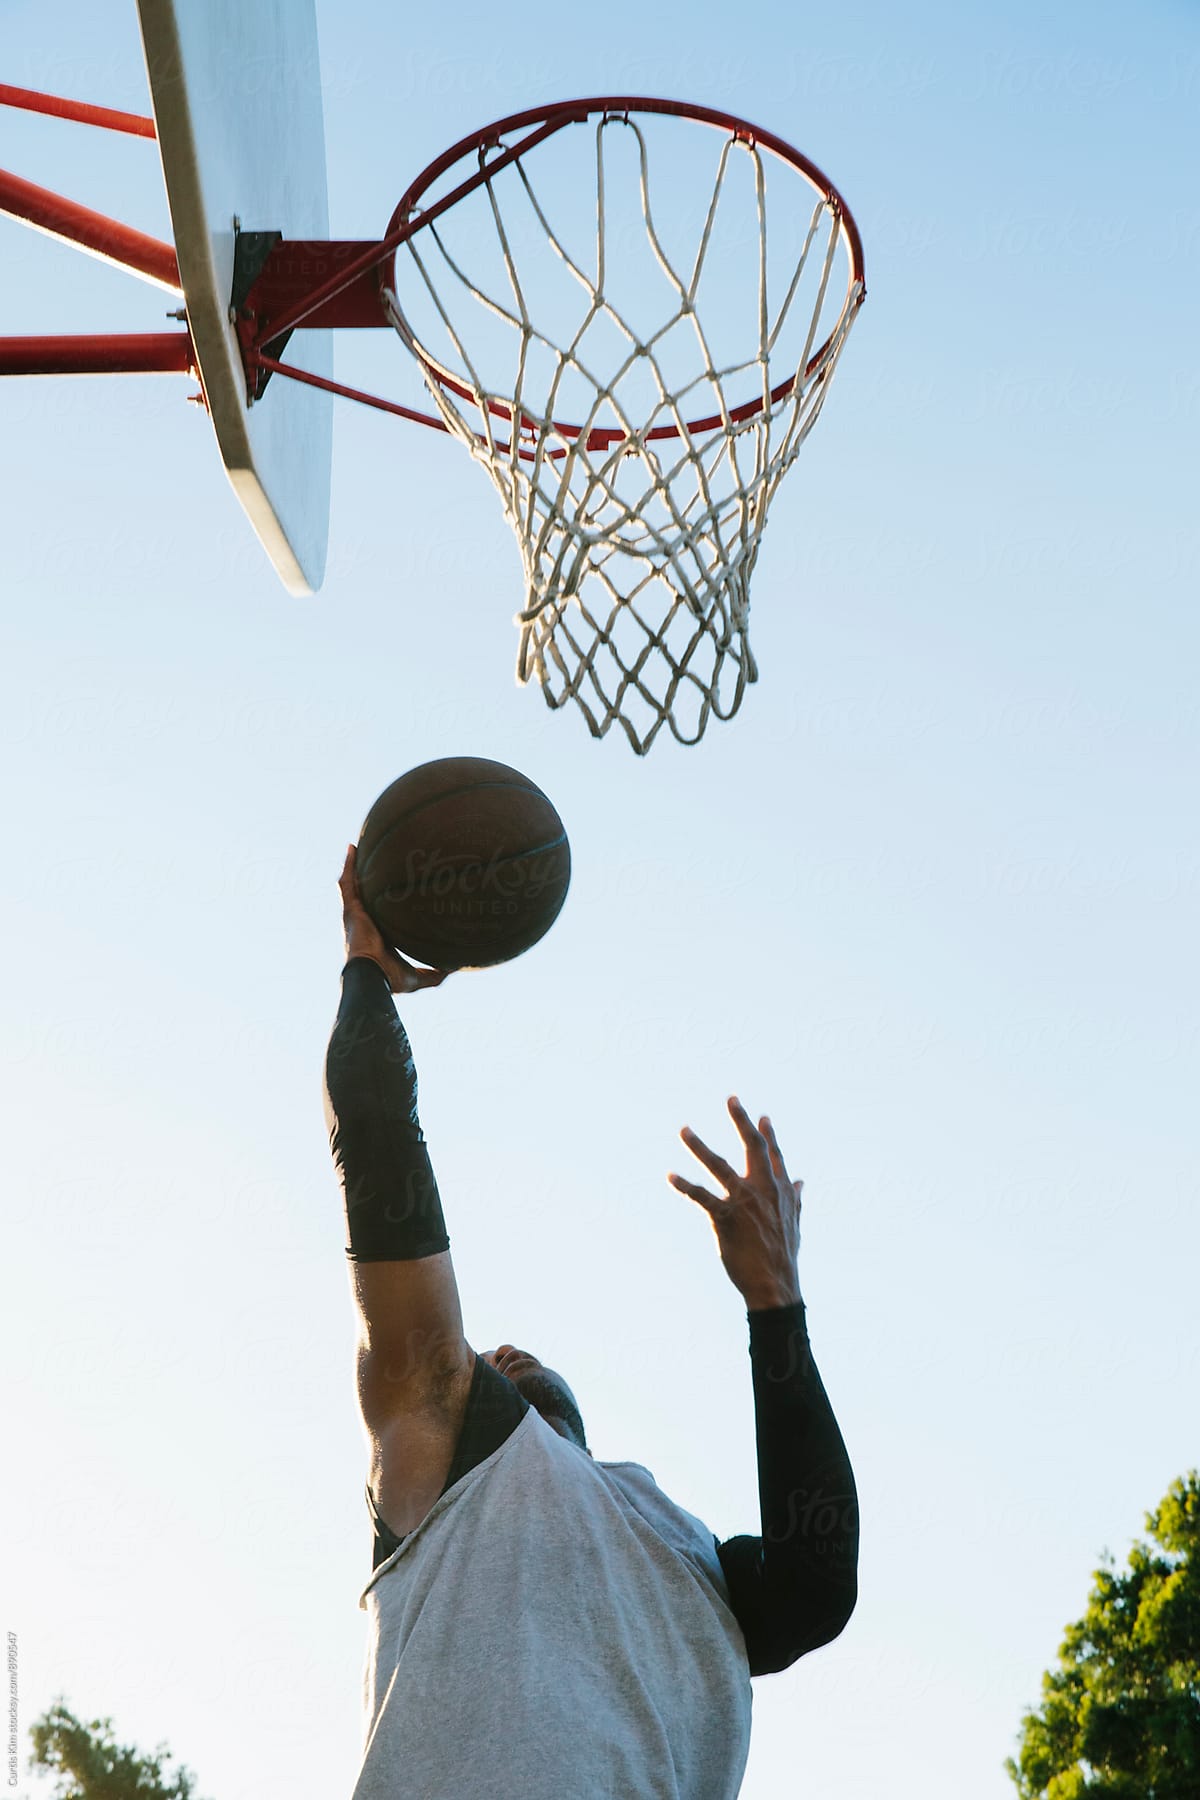 Basketball player in the air for a layup